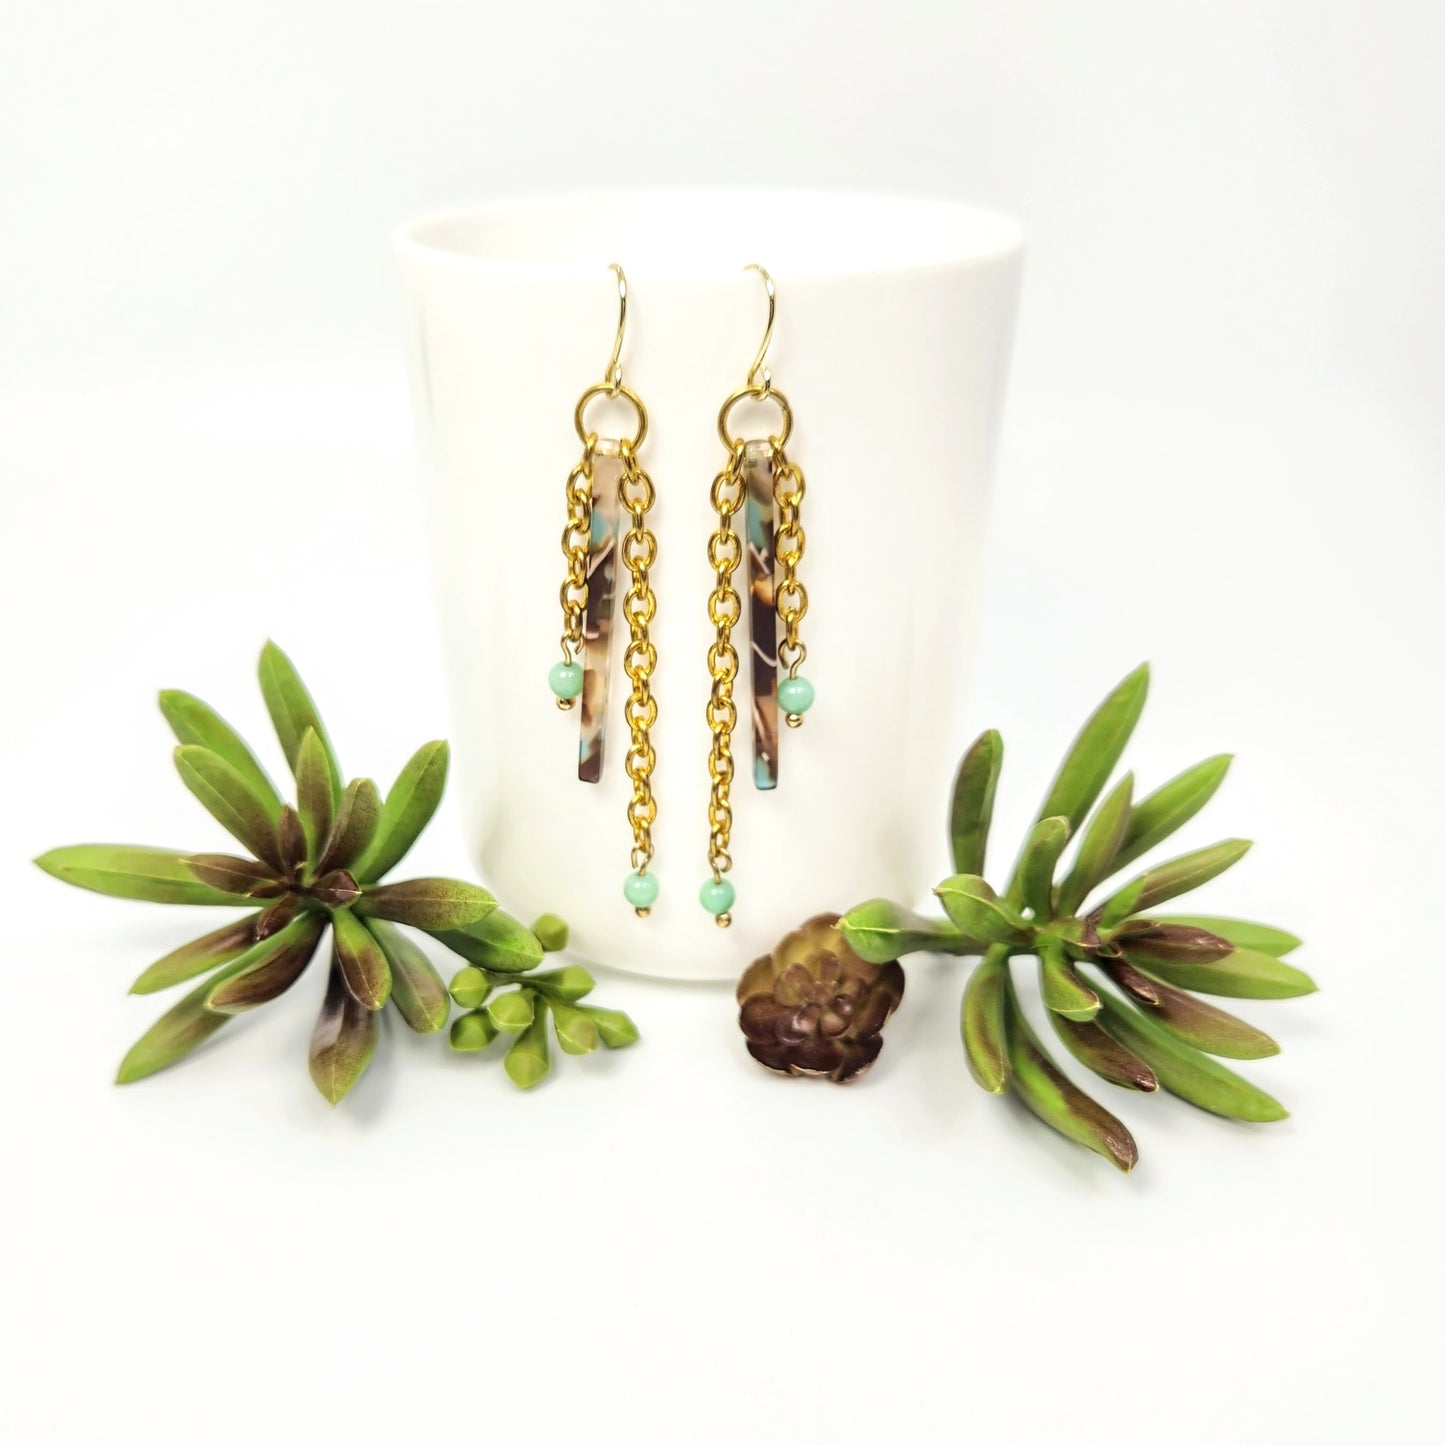 Matchstick Acetate Tiered Earrings